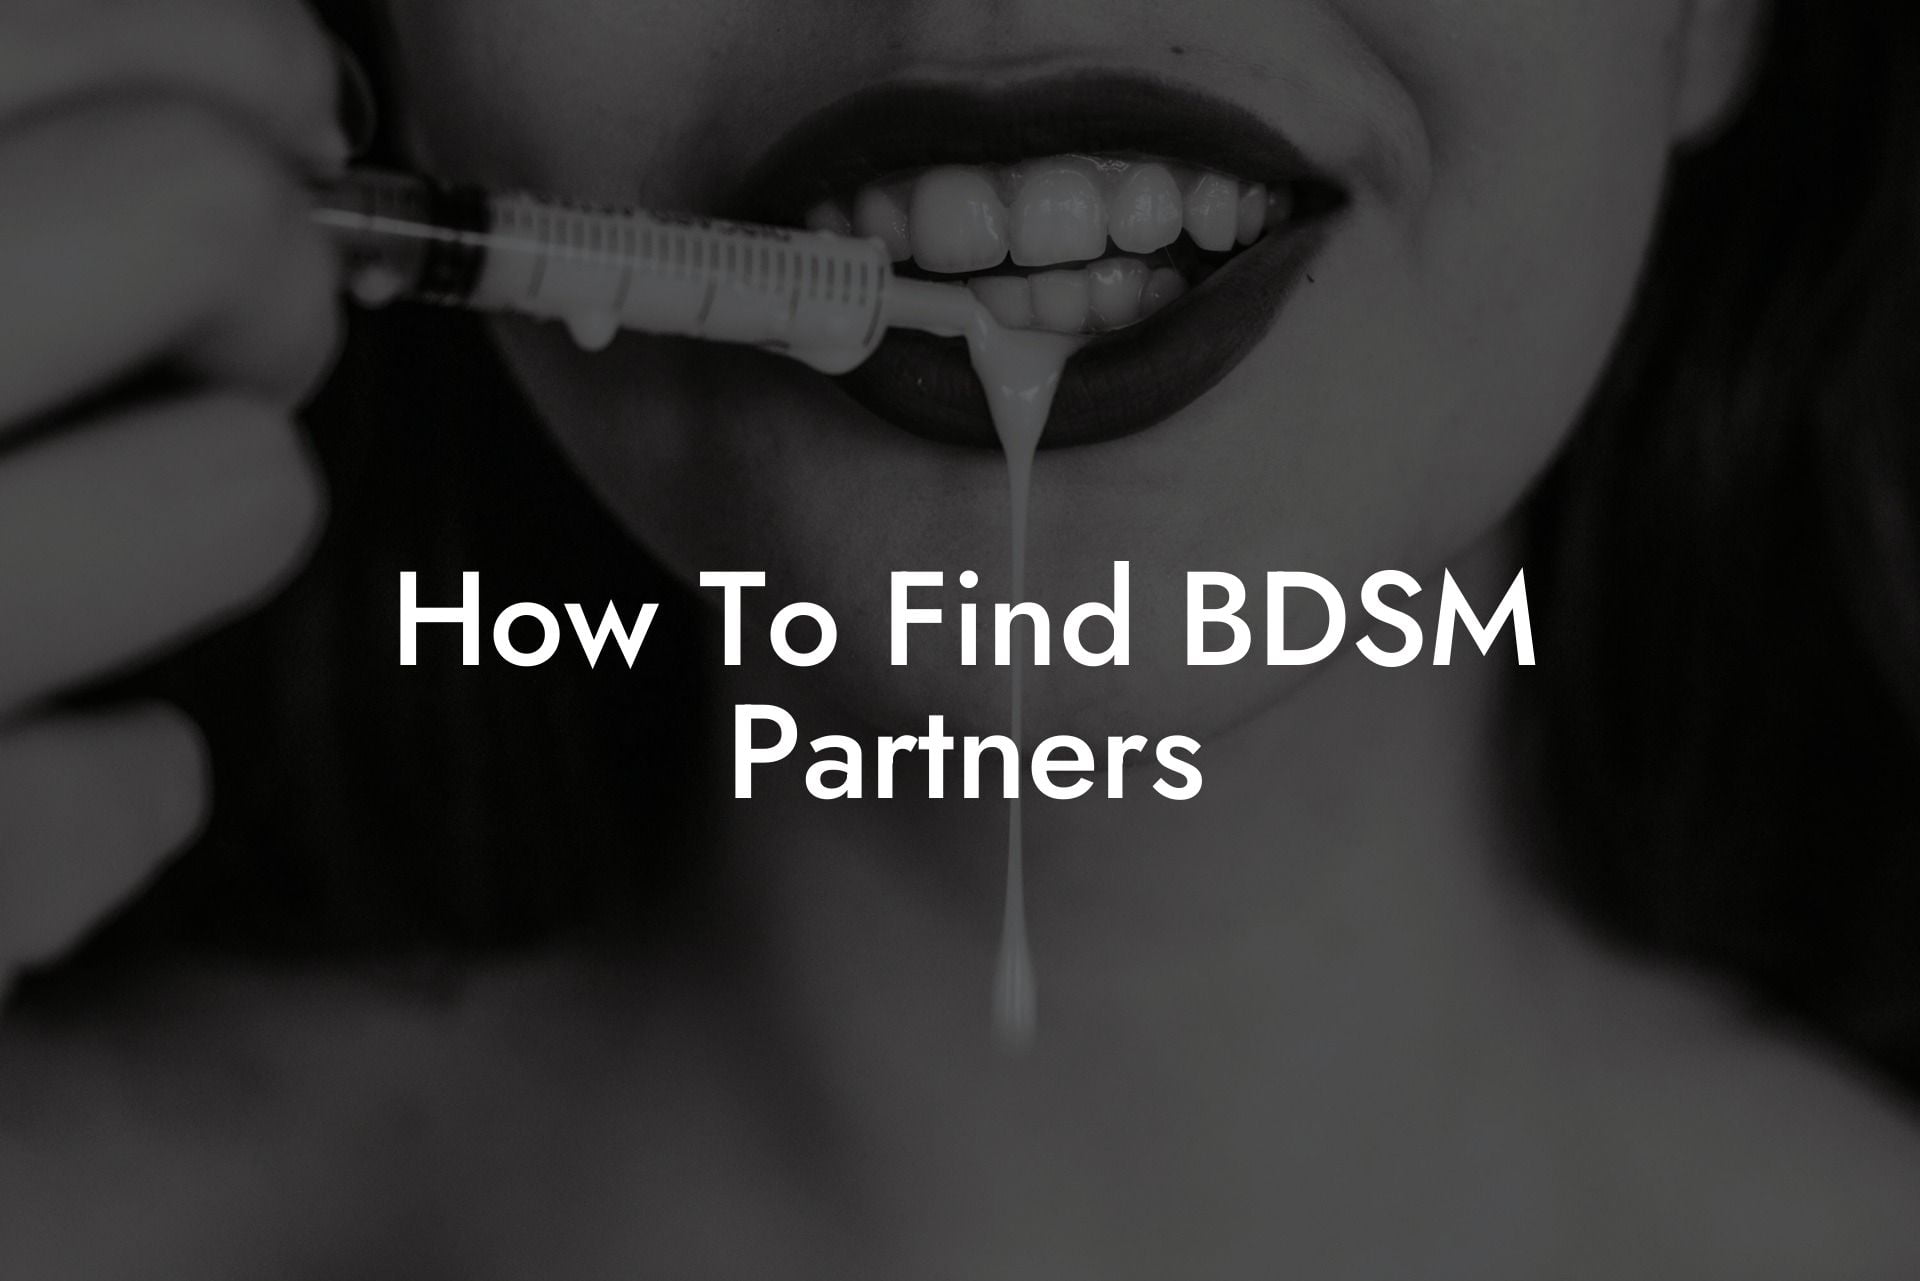 How To Find BDSM Partners